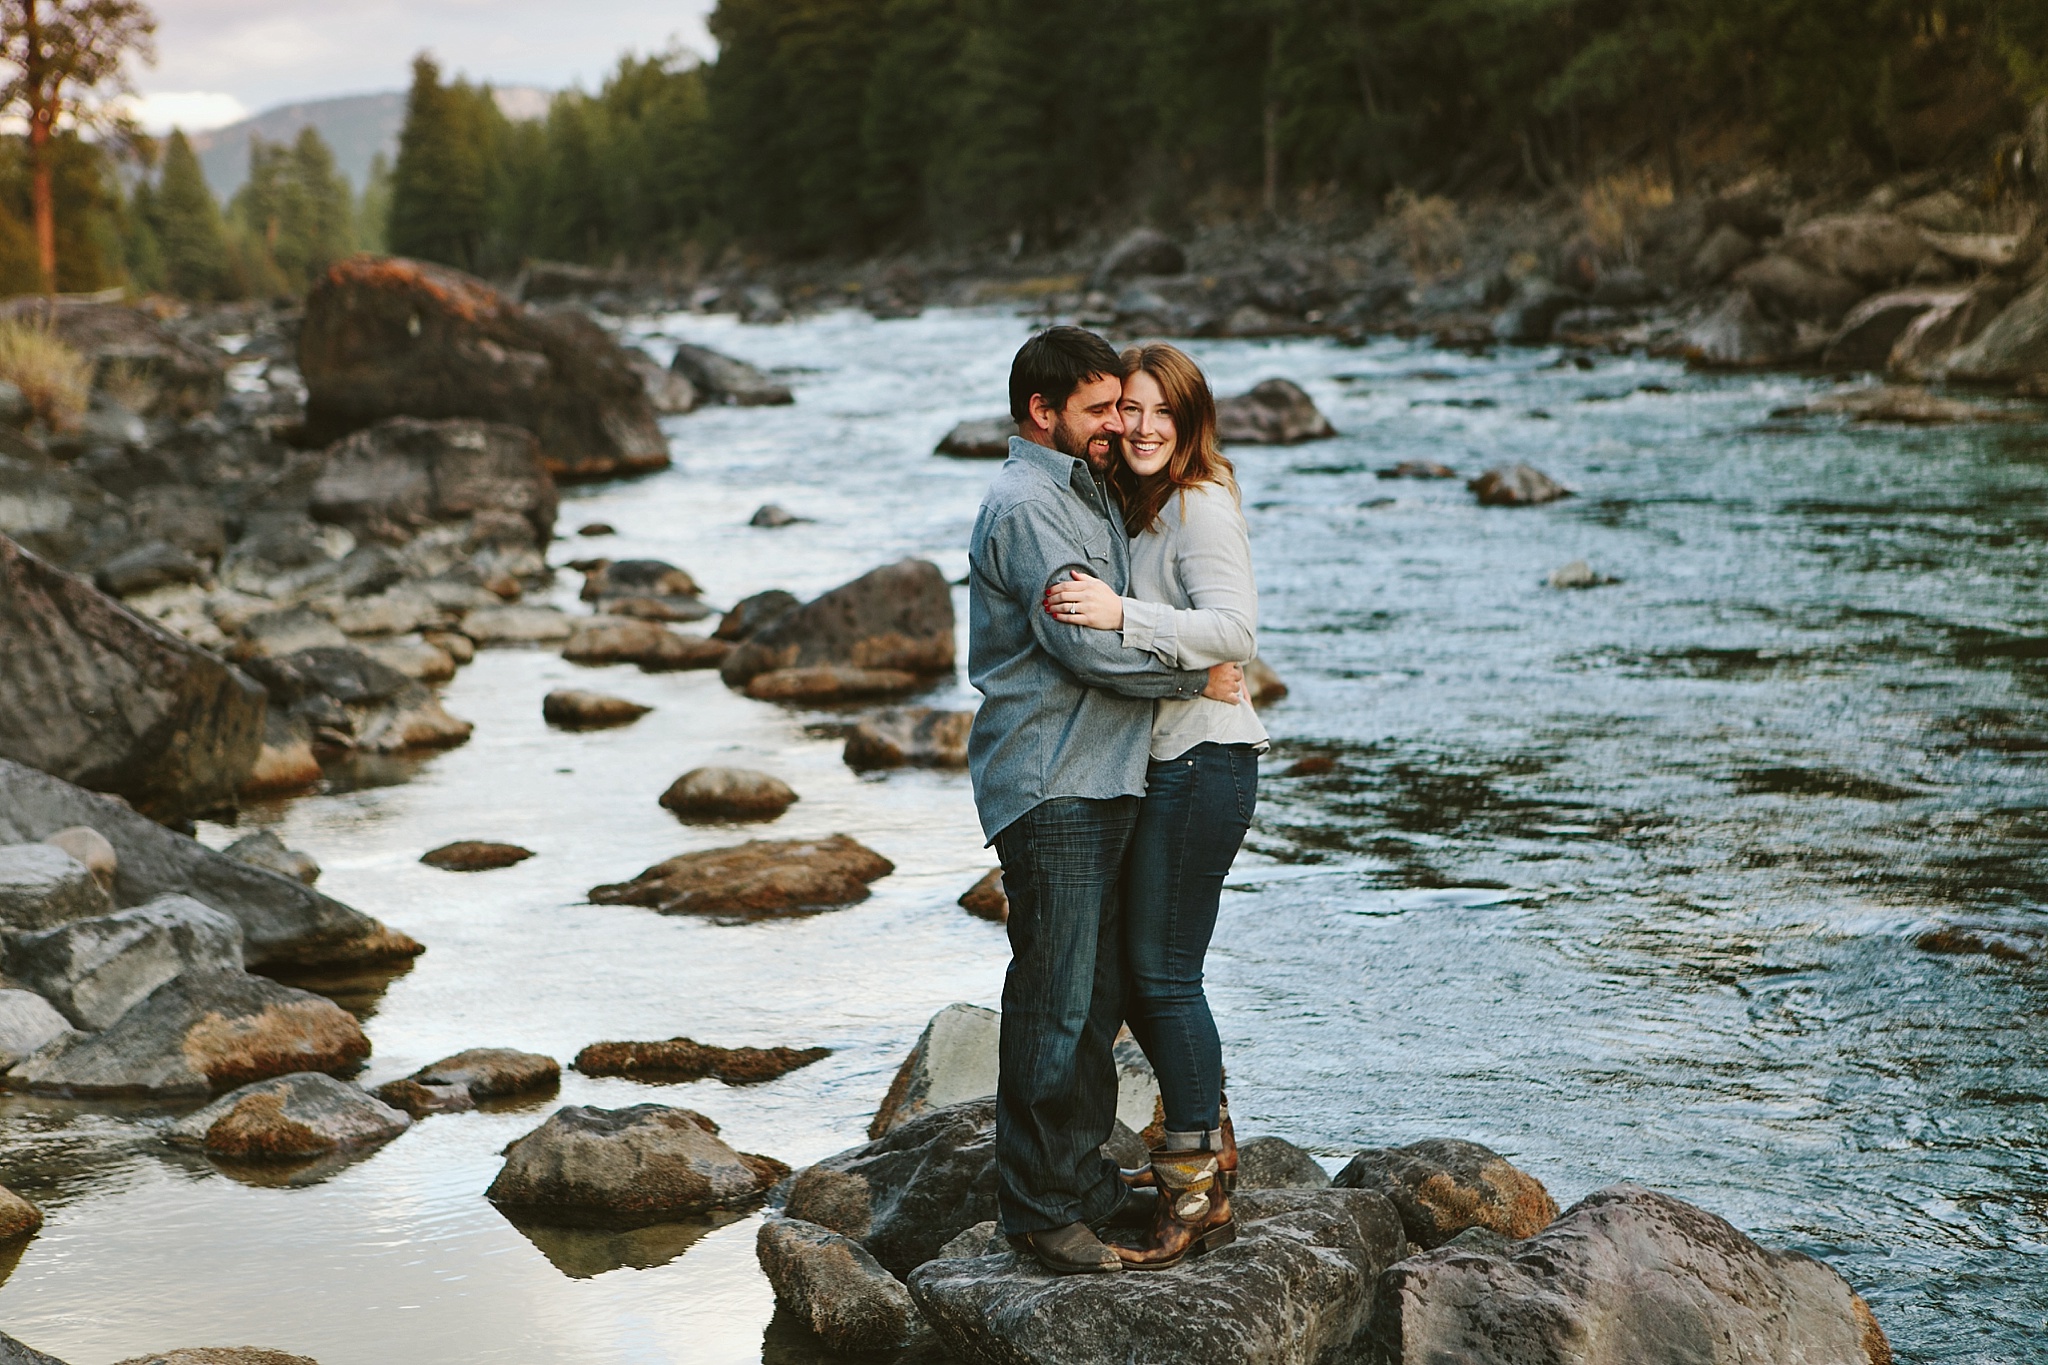 Missoula MT Engagement Photos Bride and Groom Hugging on Rocks at the River